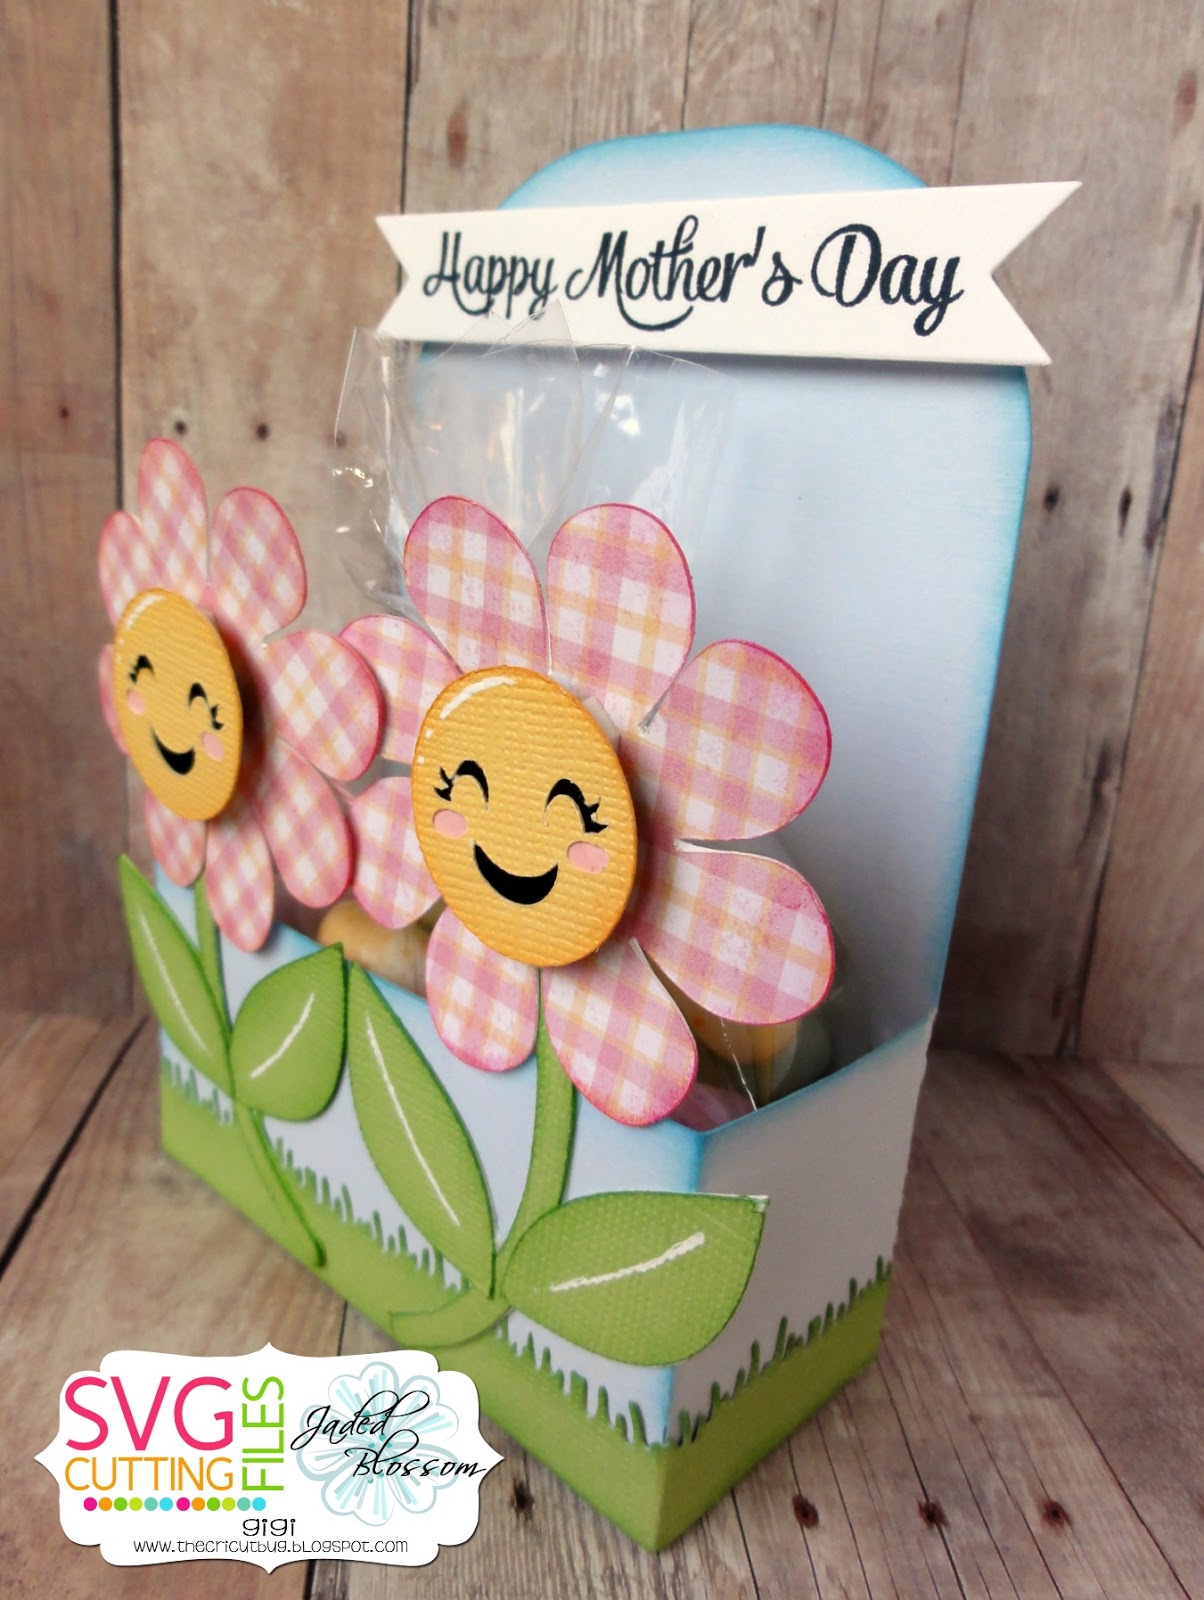 Download SVG Cutting Files: Mother's Day Flower Treat Box